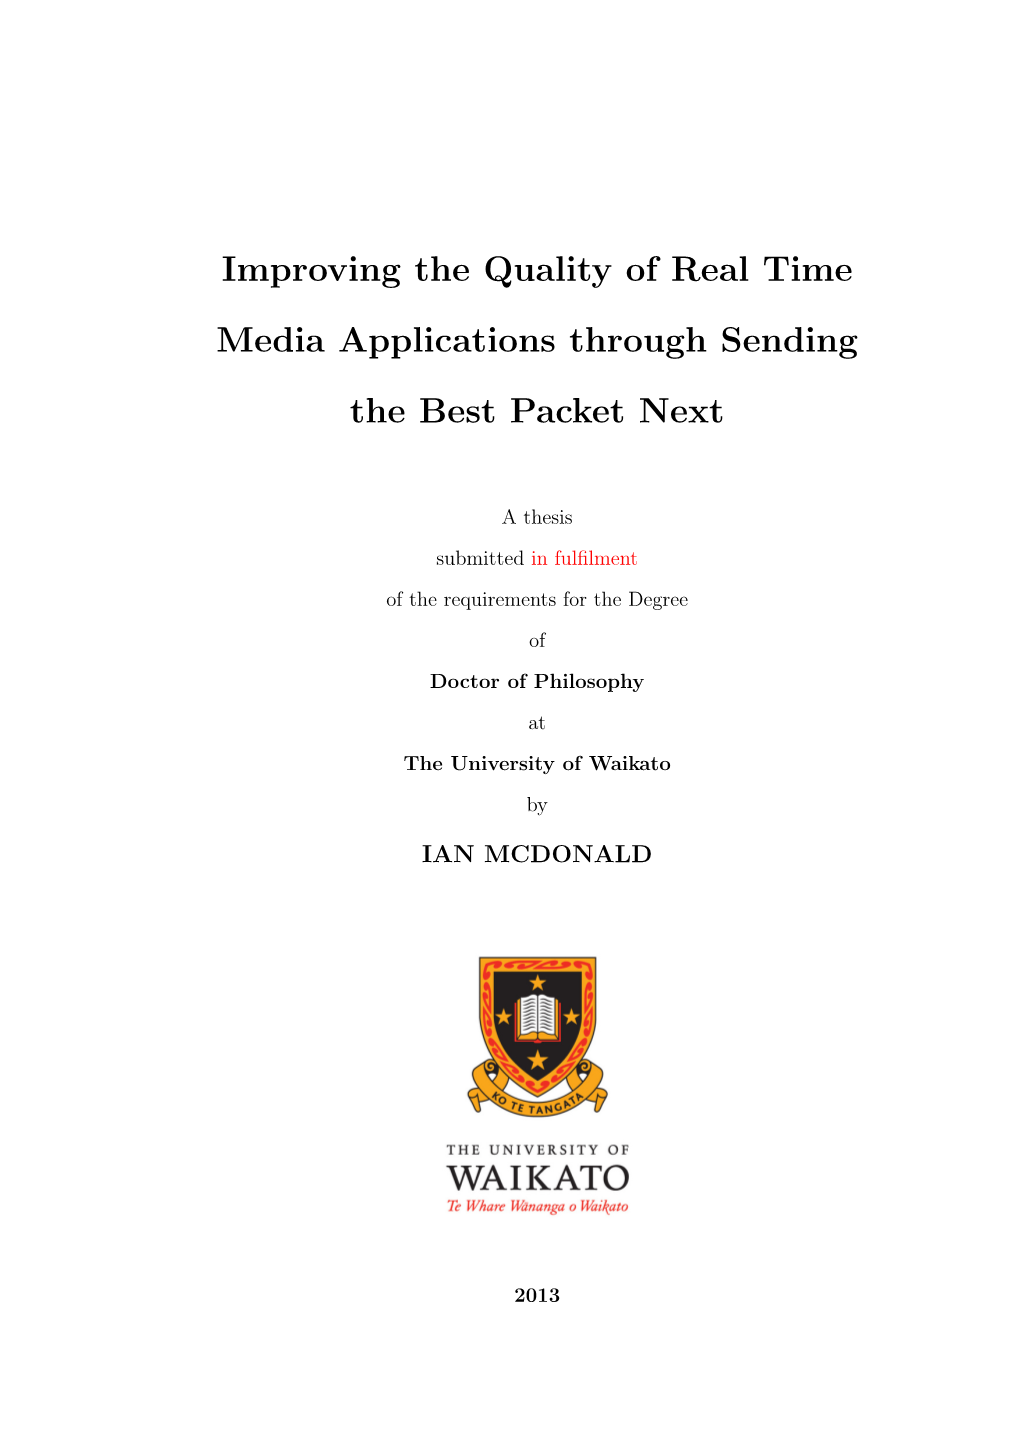 Improving the Quality of Real Time Media Applications Through